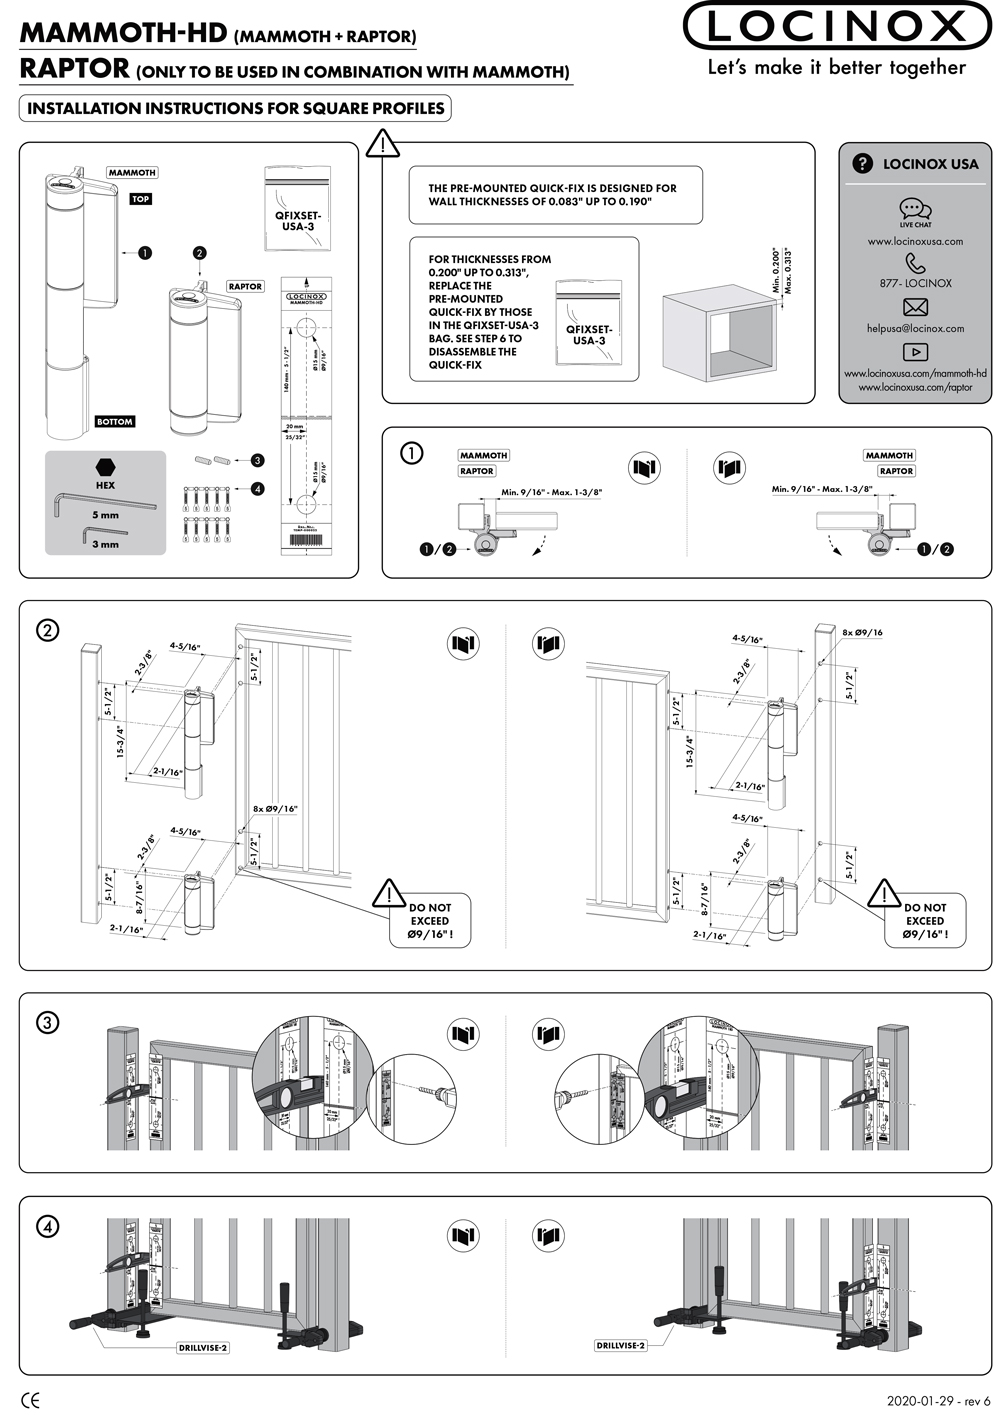 Installation Instructions for the Locinox MAMMOTH-HD Hydraulic Gate Closer/Hinges